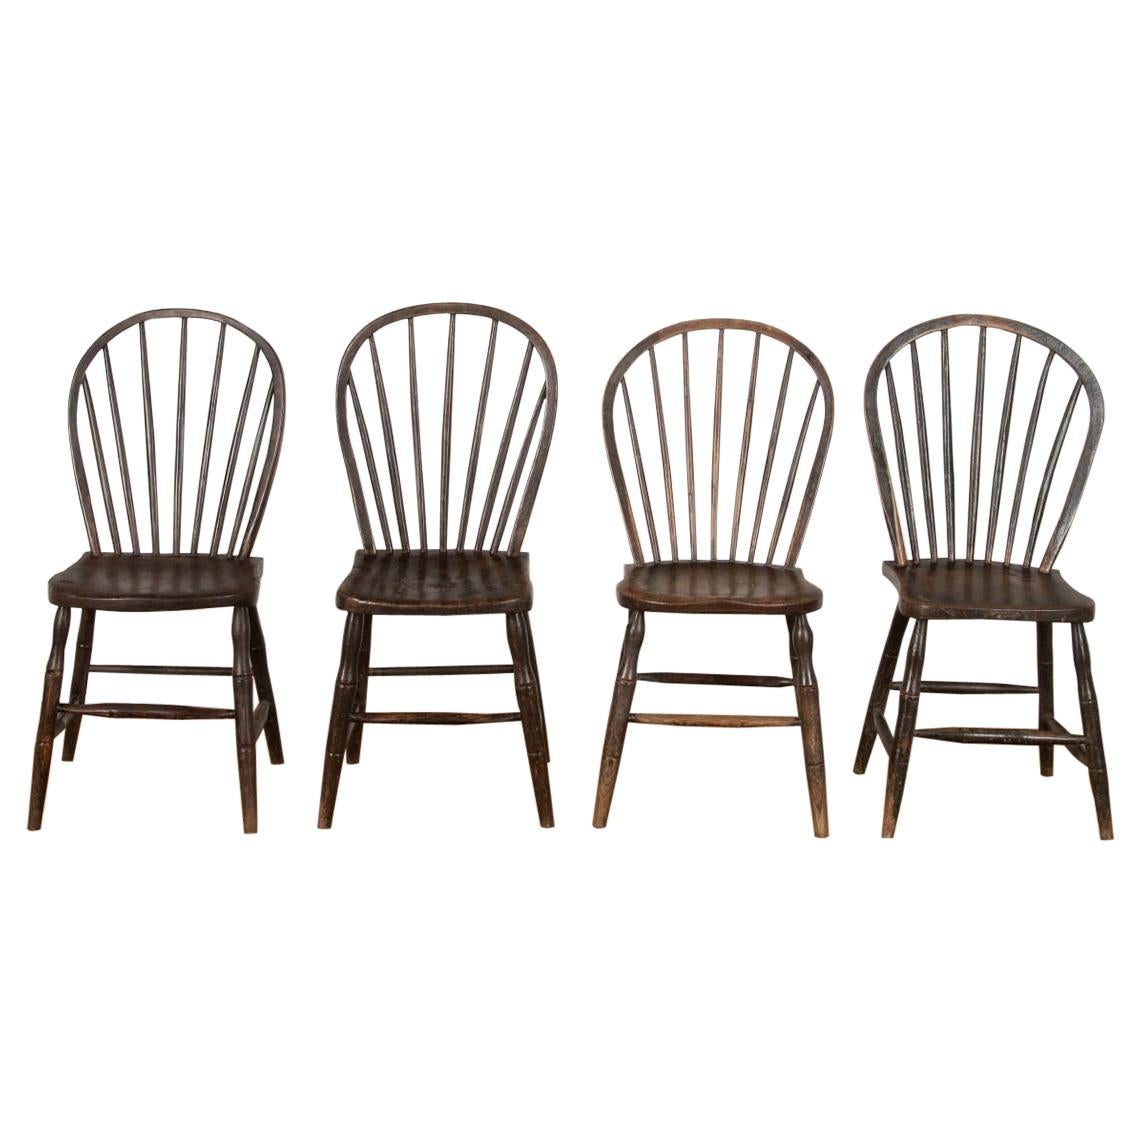 Four 19th Century West Country Hoop and Stick Back Chairs